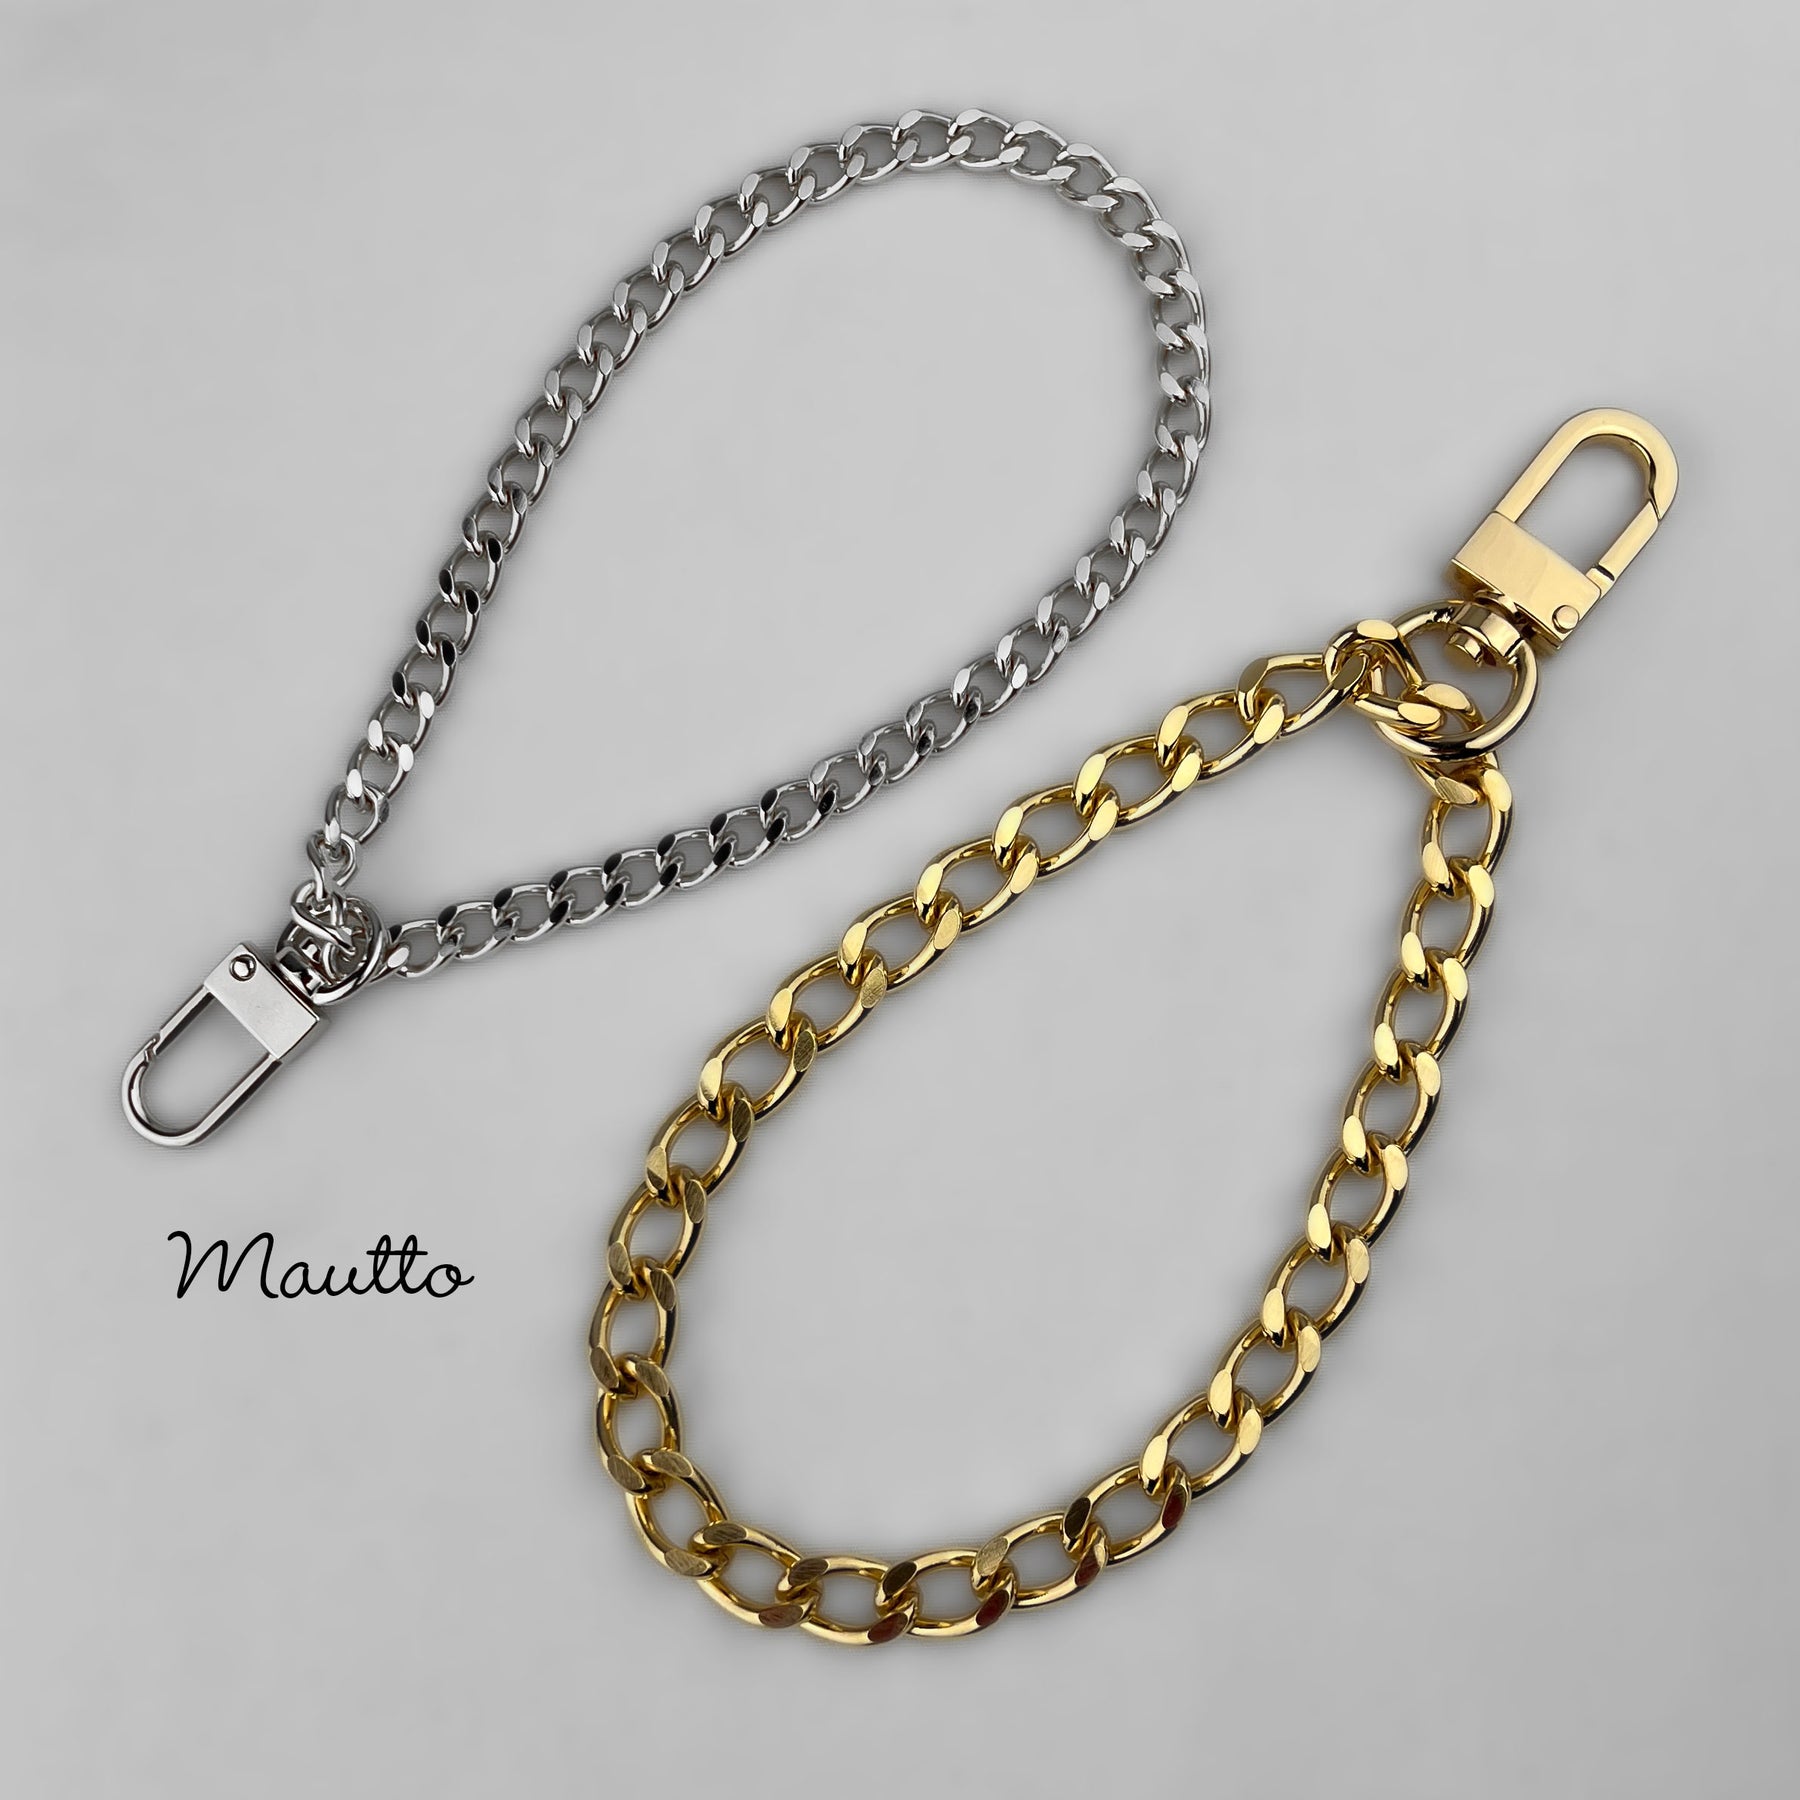 https://mautto.com/cdn/shop/products/luxury-gold-silver-chain-wrist-strap-for-wallet-card-holder-slg-mautto_1800x1800.jpg?v=1650045754